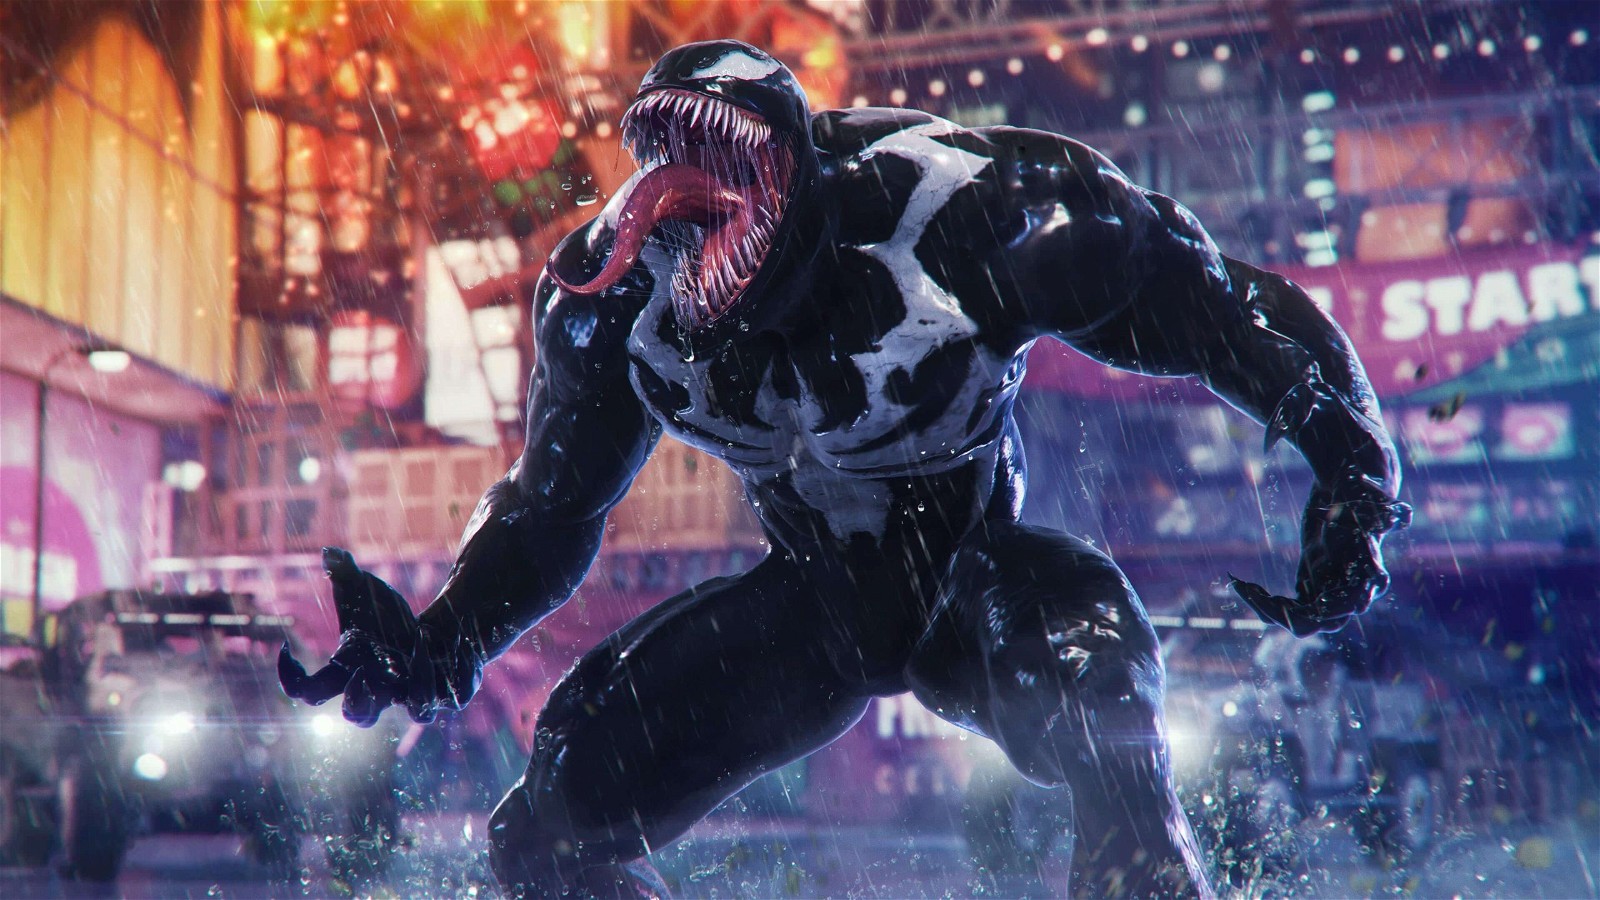 Insomniac Games is developing a spin-off game with Venom